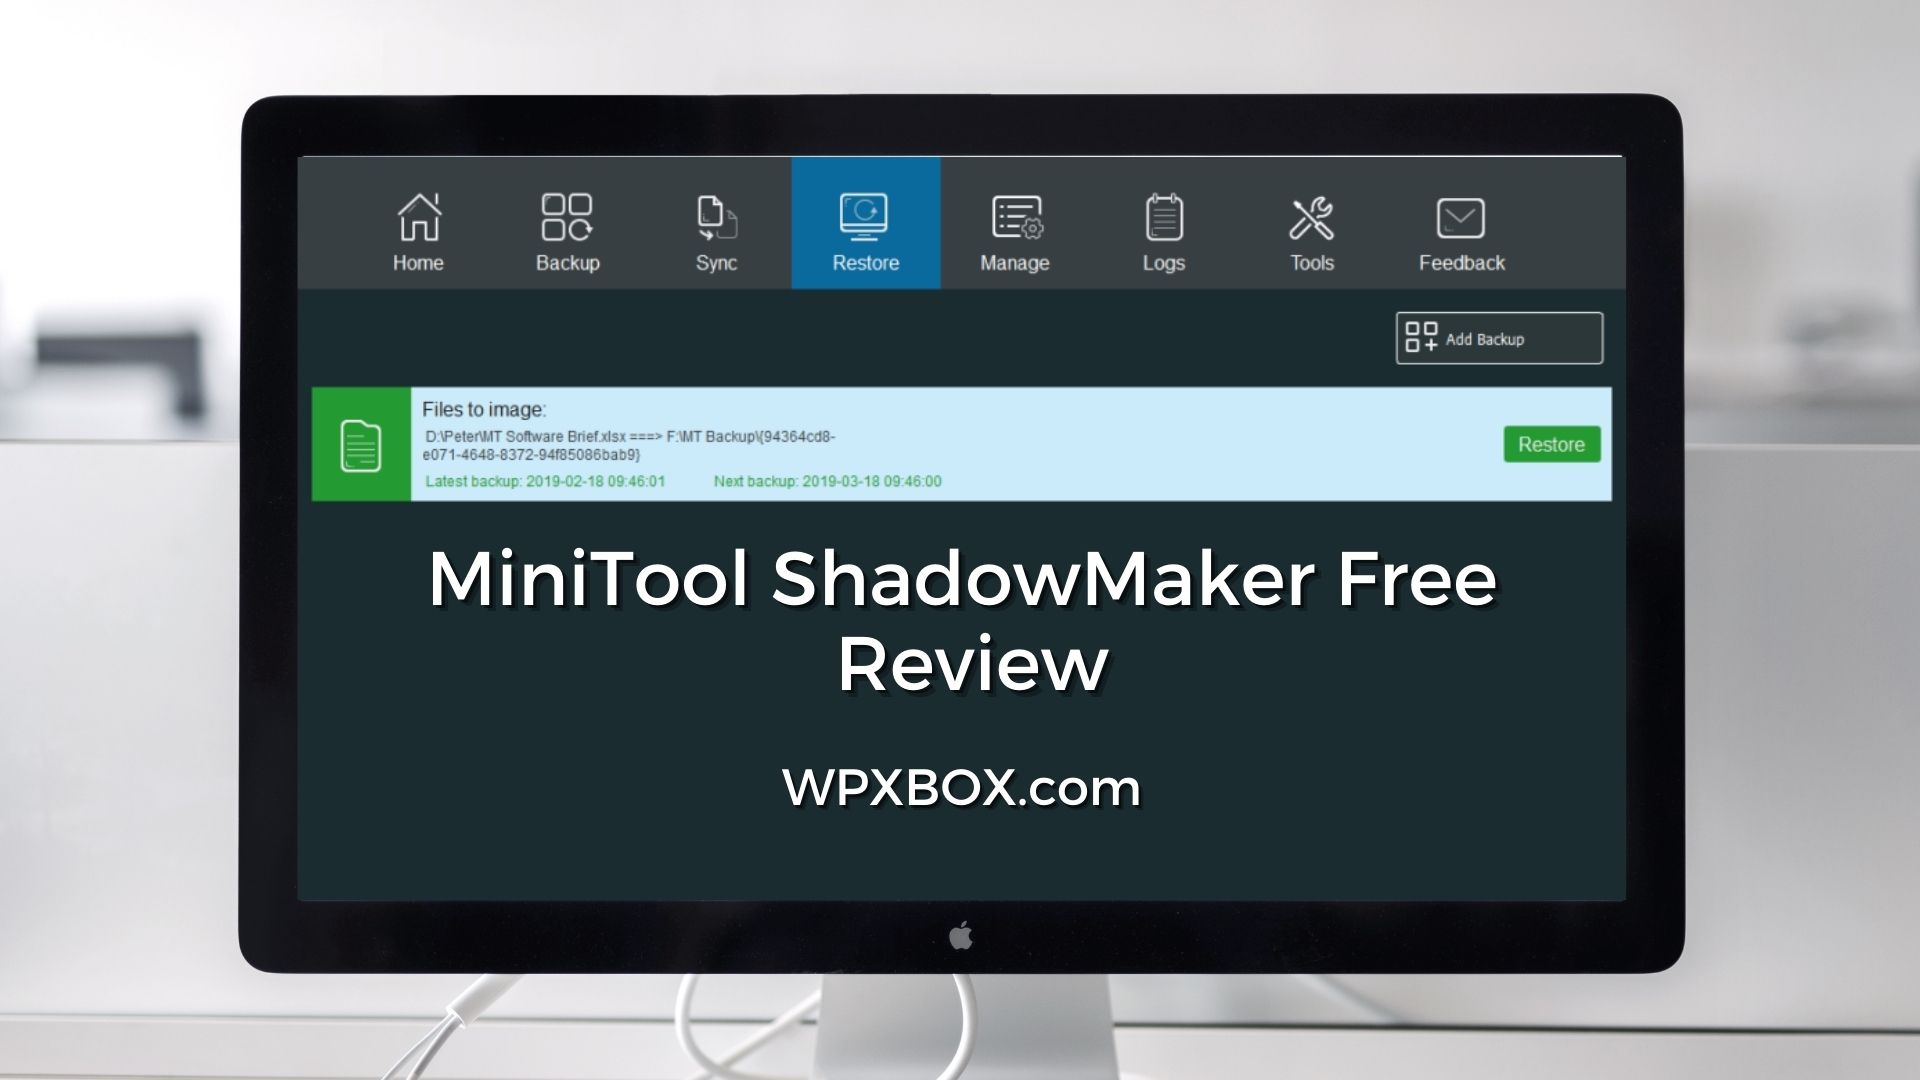 download the new for apple MiniTool ShadowMaker 4.2.0